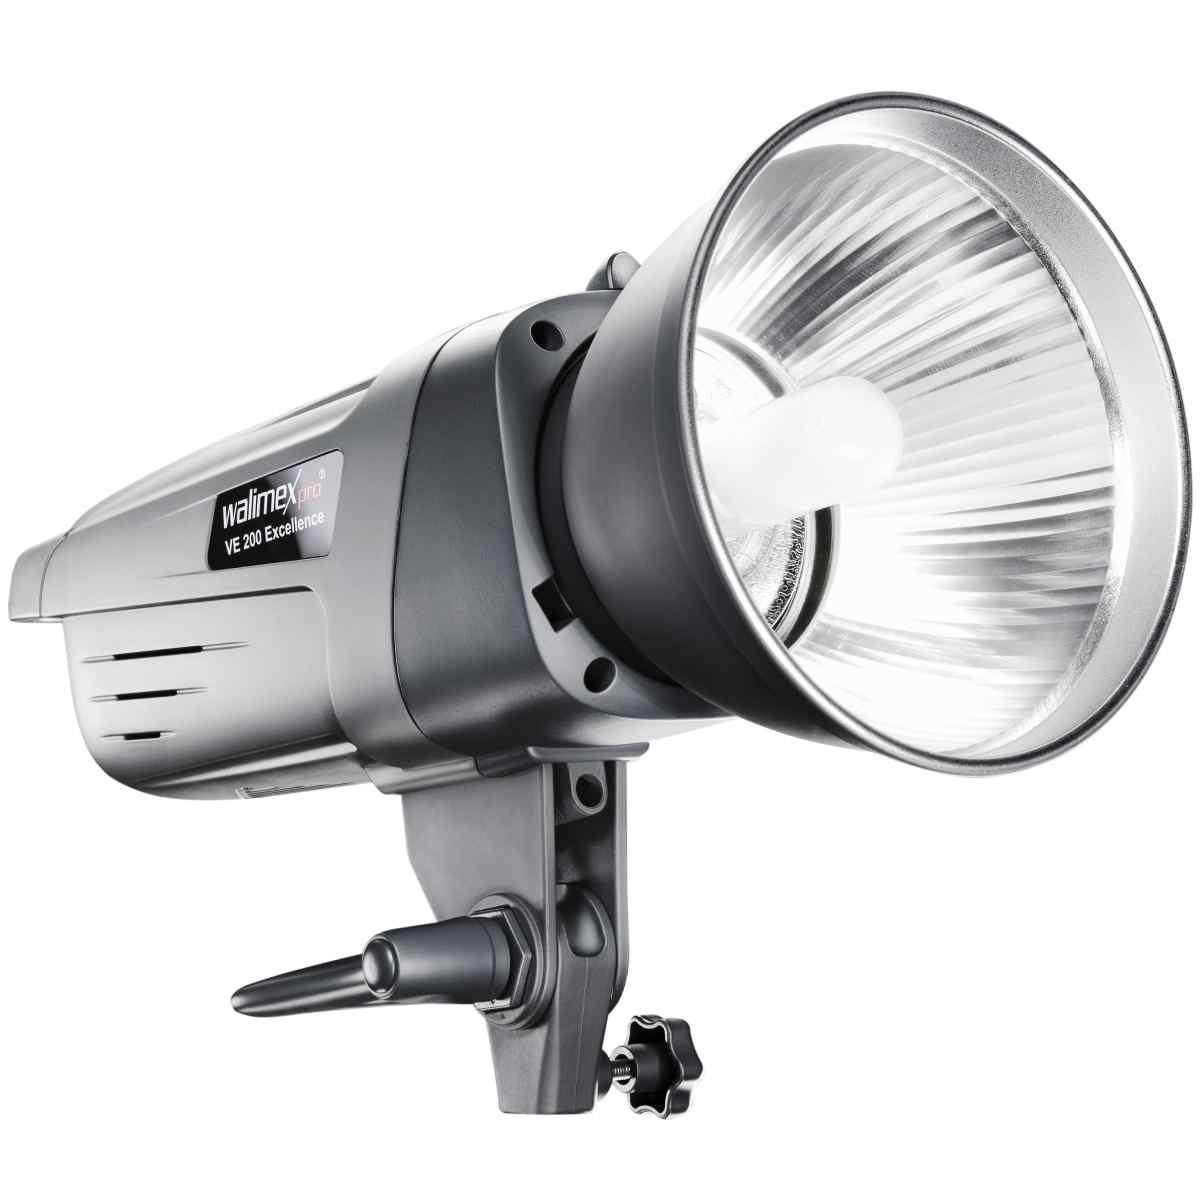 Walimex pro VE-200 Excellence Studio flash